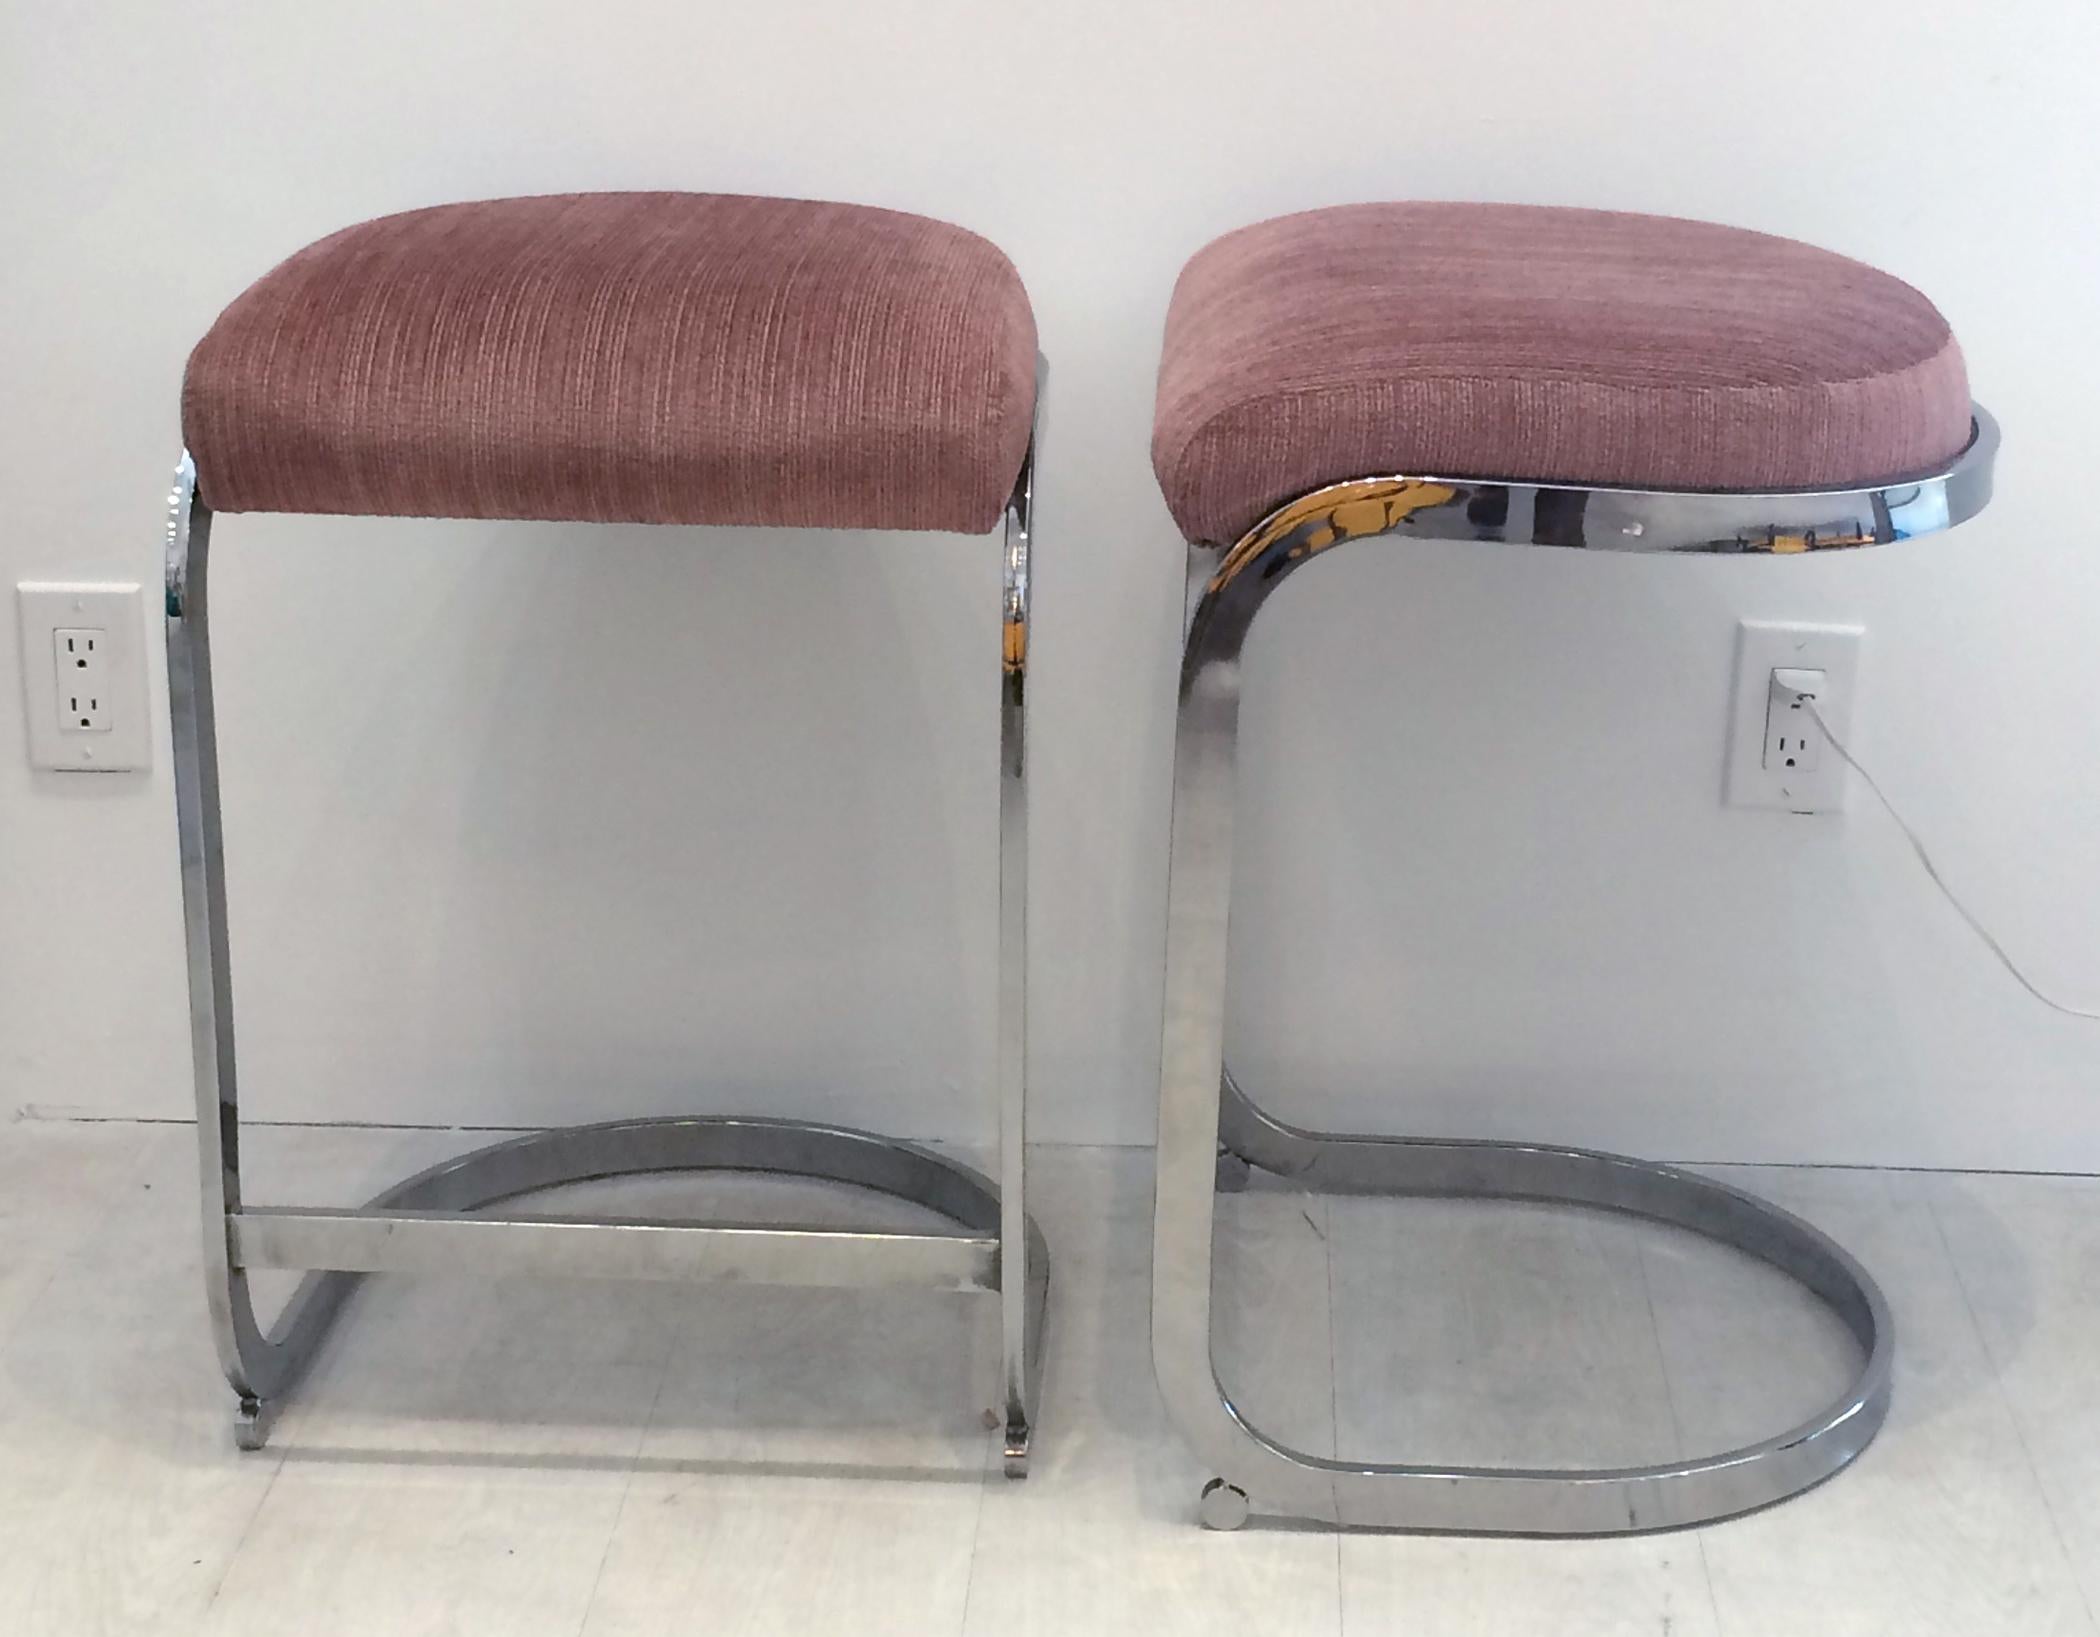 Set of four vintage cantilevered chrome bar stools with fabric seats. Designed by Milo Baughman. I've seen the manufacturer of these bar stools attributed to both DIA design institute of America and Dillingham. The set is in very good condition both